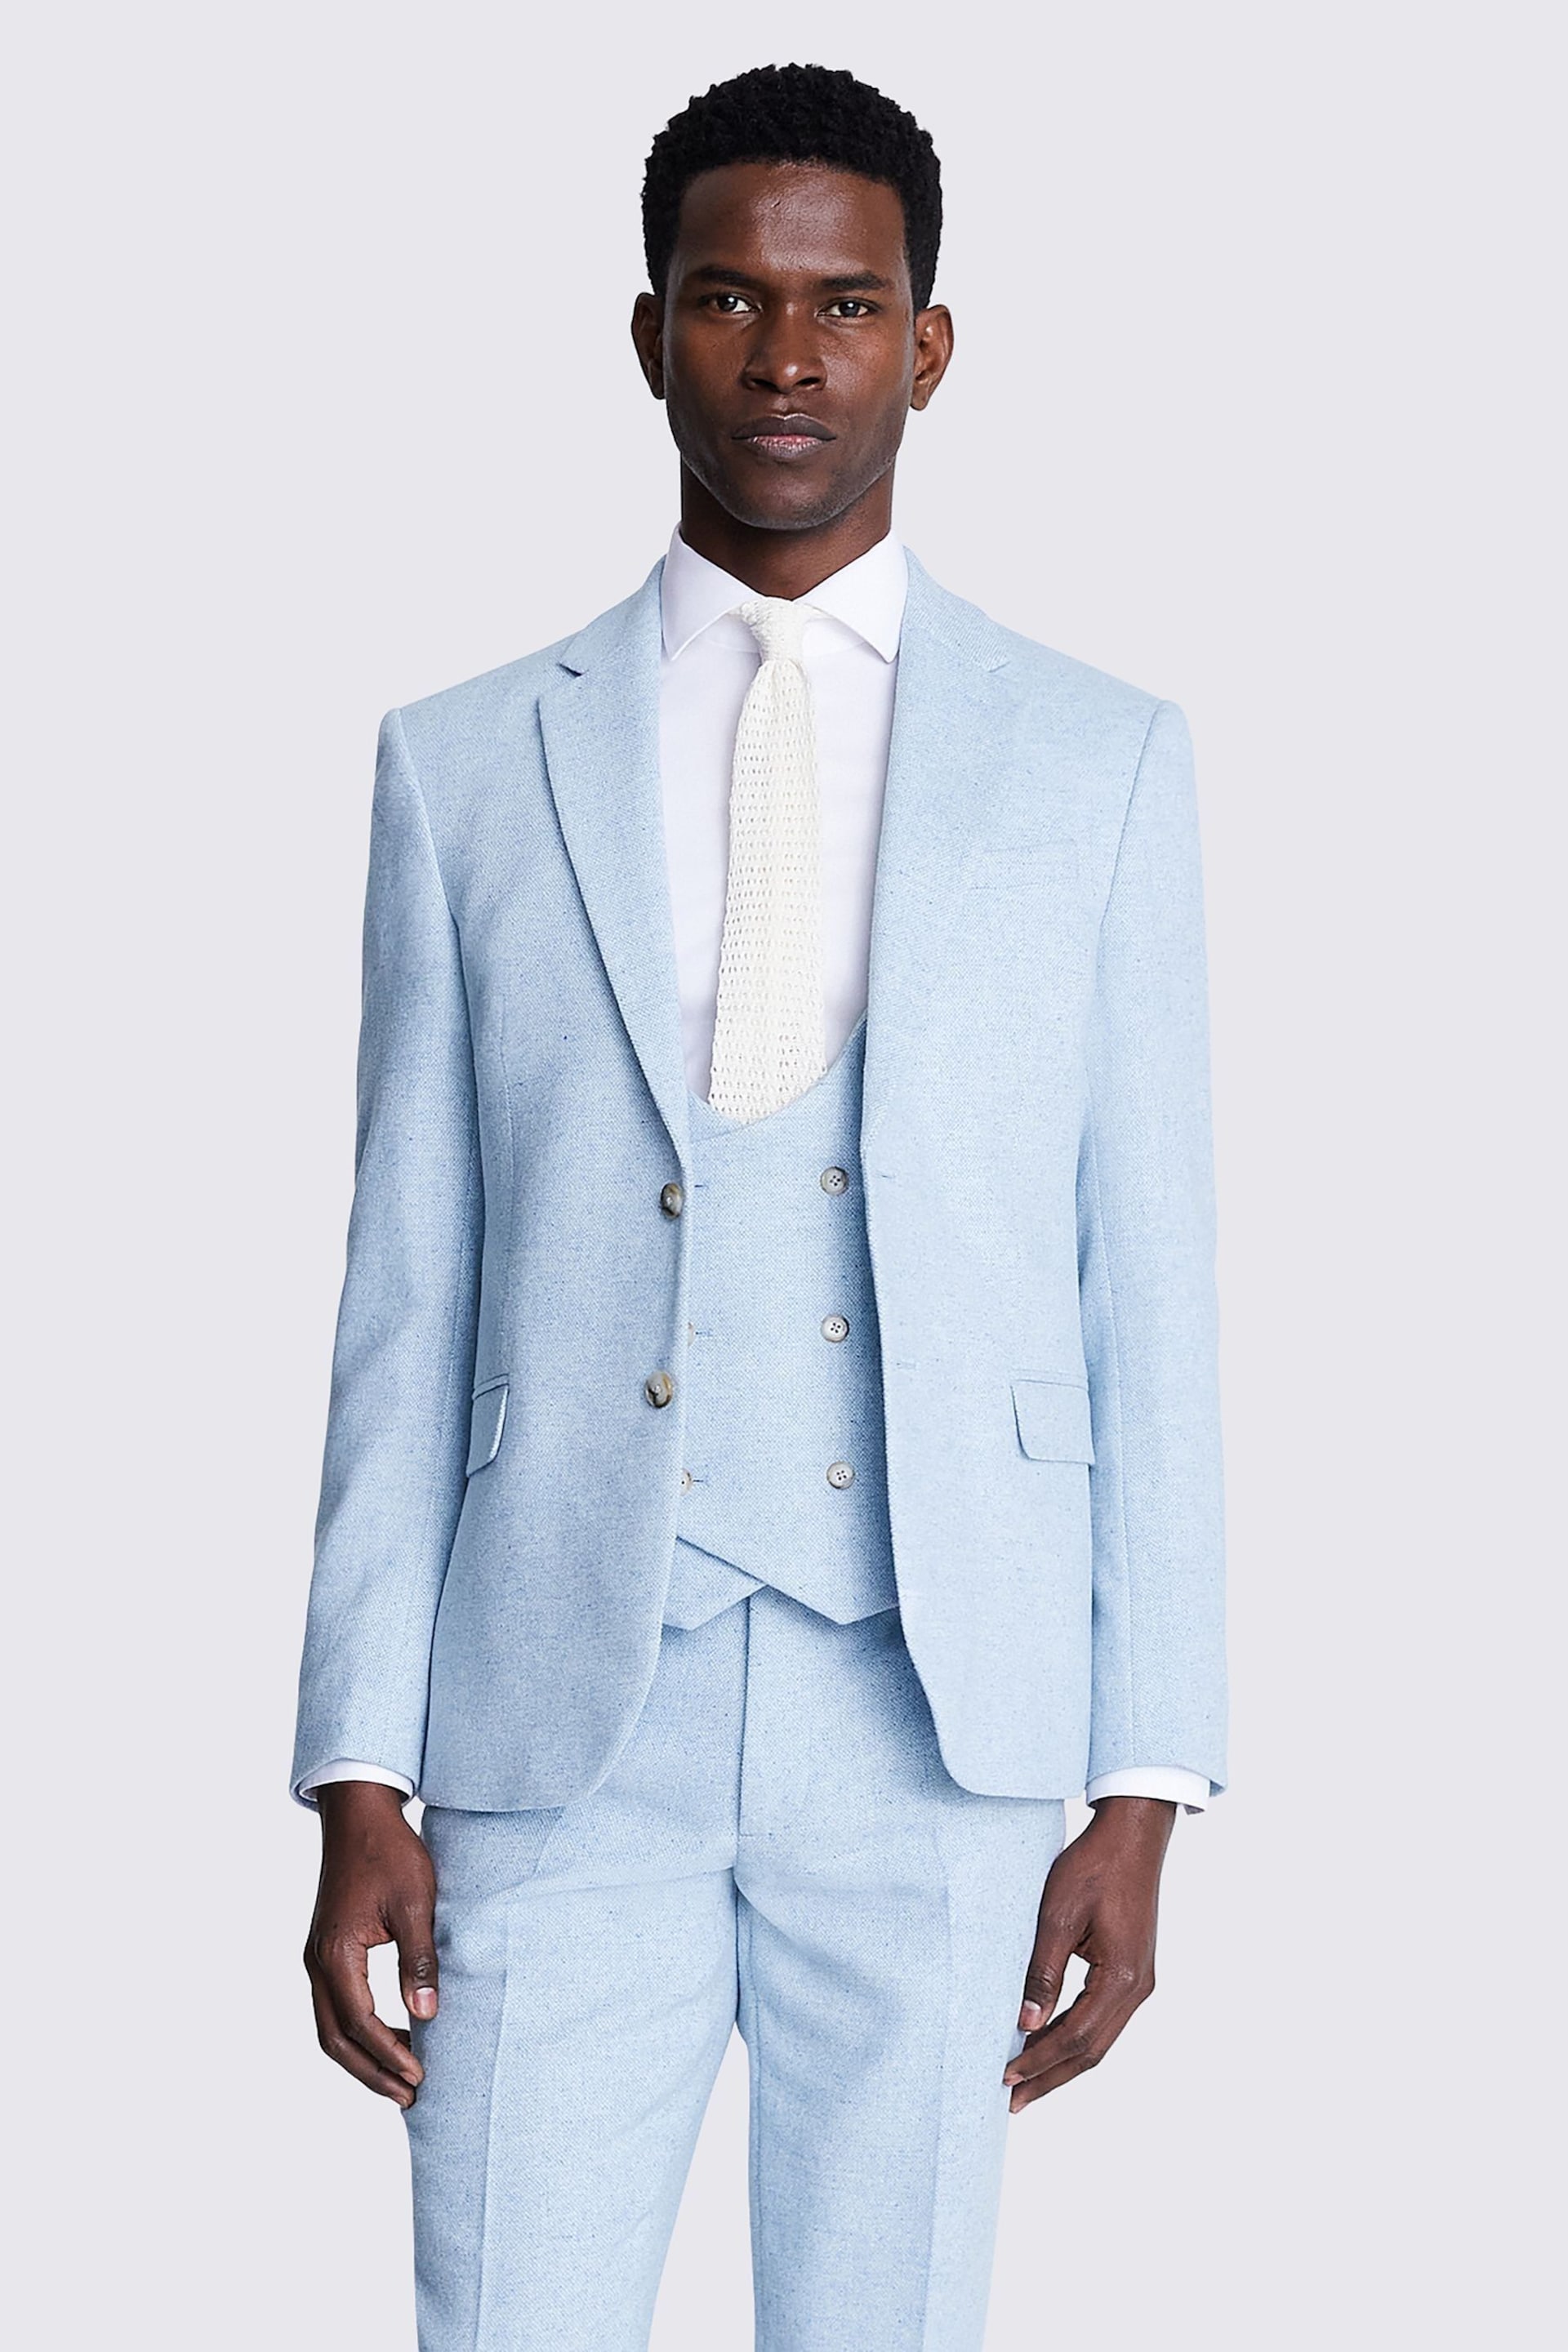 MOSS Blue Slim Fit Donegal Jacket - Image 1 of 6